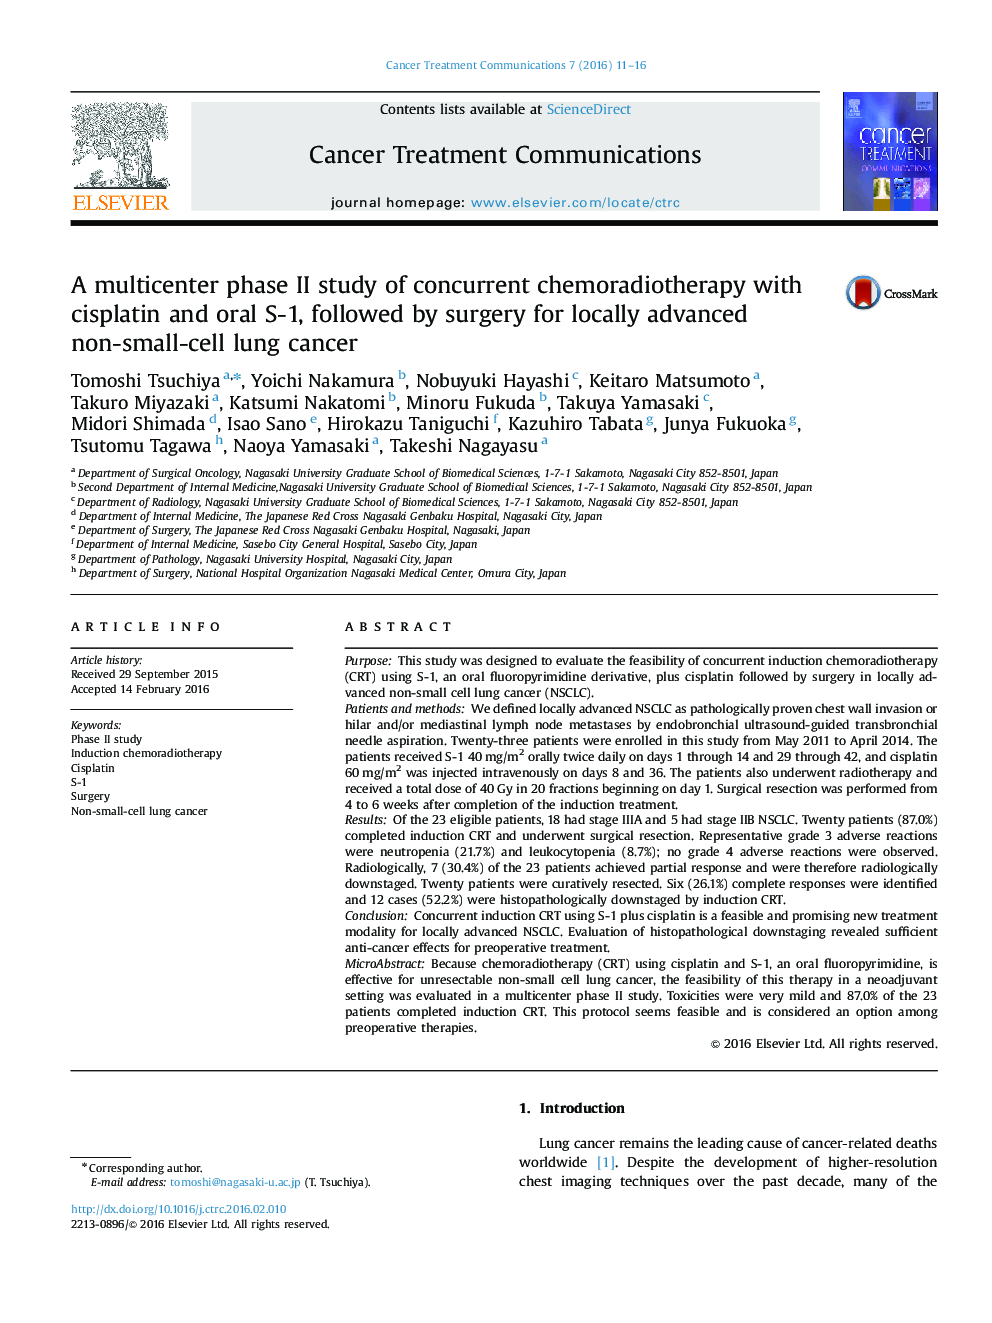 A multicenter phase II study of concurrent chemoradiotherapy with cisplatin and oral S-1, followed by surgery for locally advanced non-small-cell lung cancer